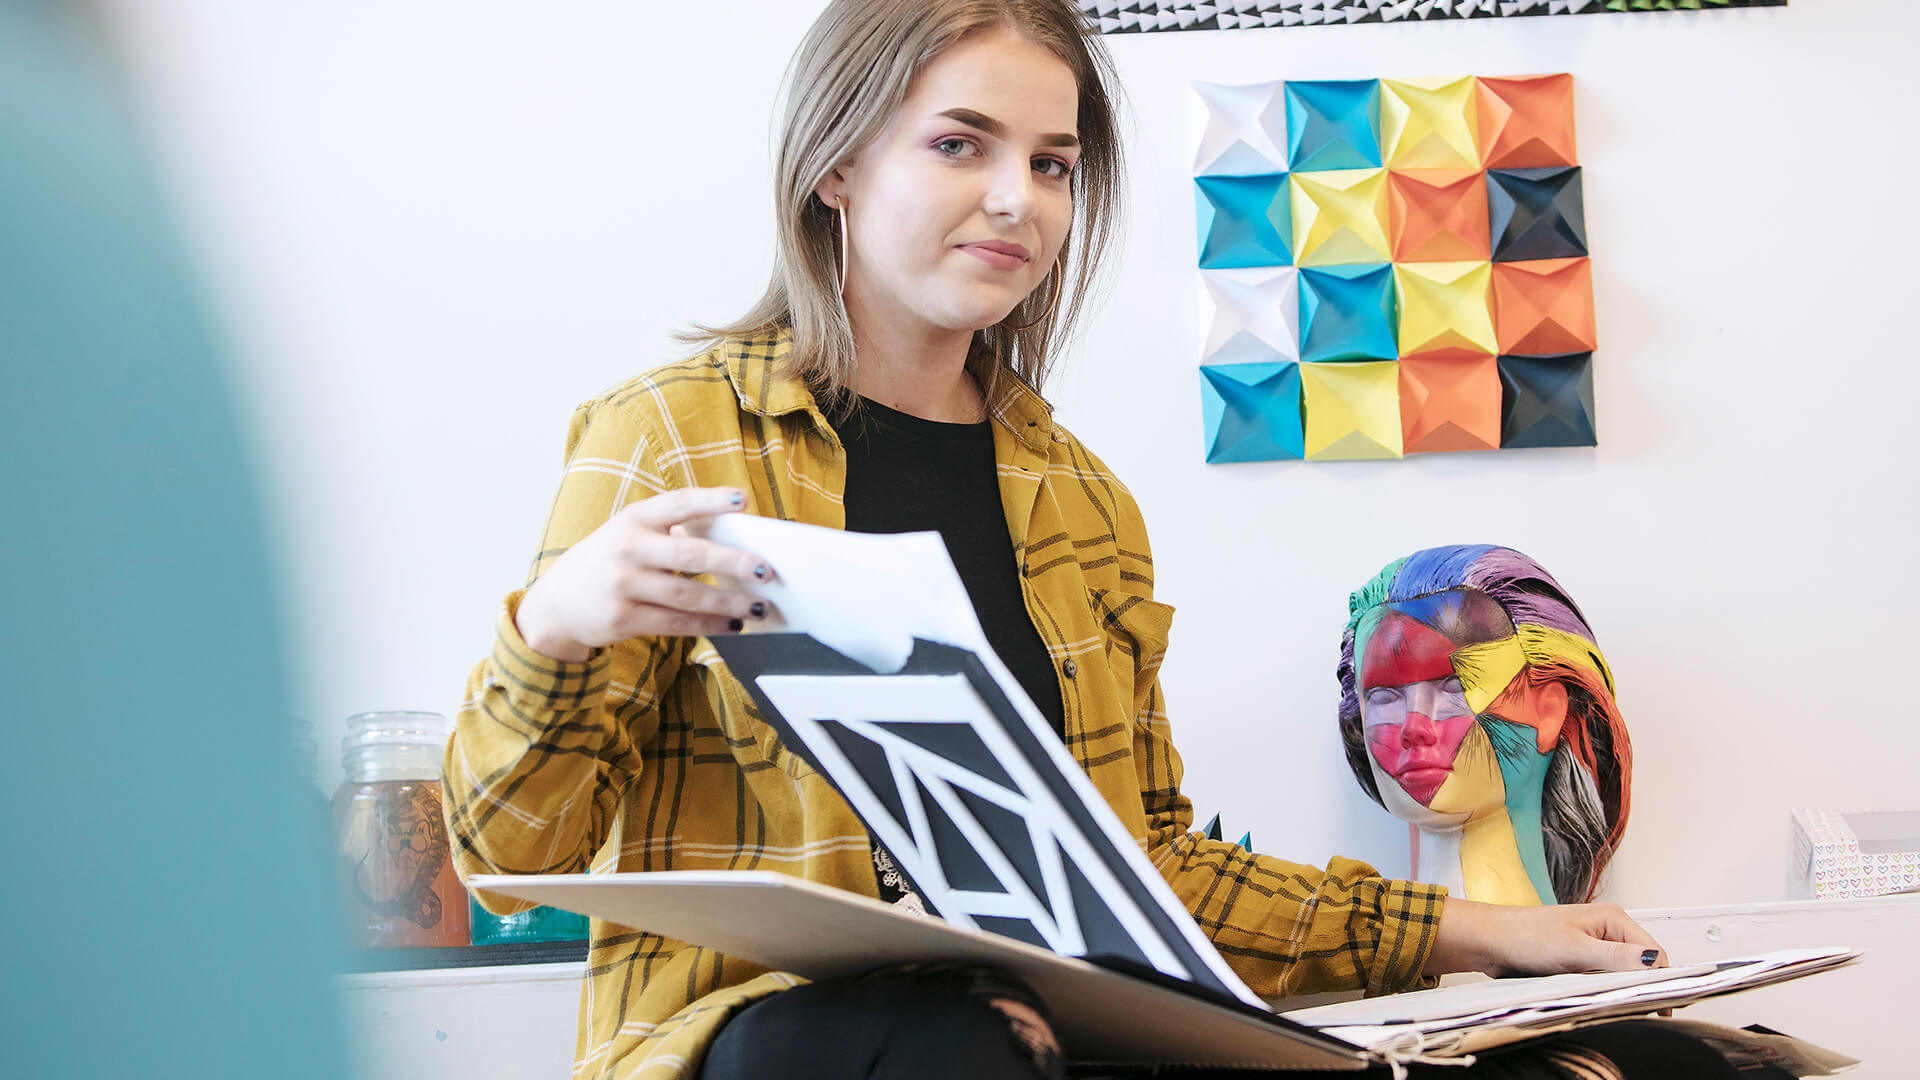 Young woman looking directly at the camera and smiling, whilst holding an art portfolio, with artwork behind her.